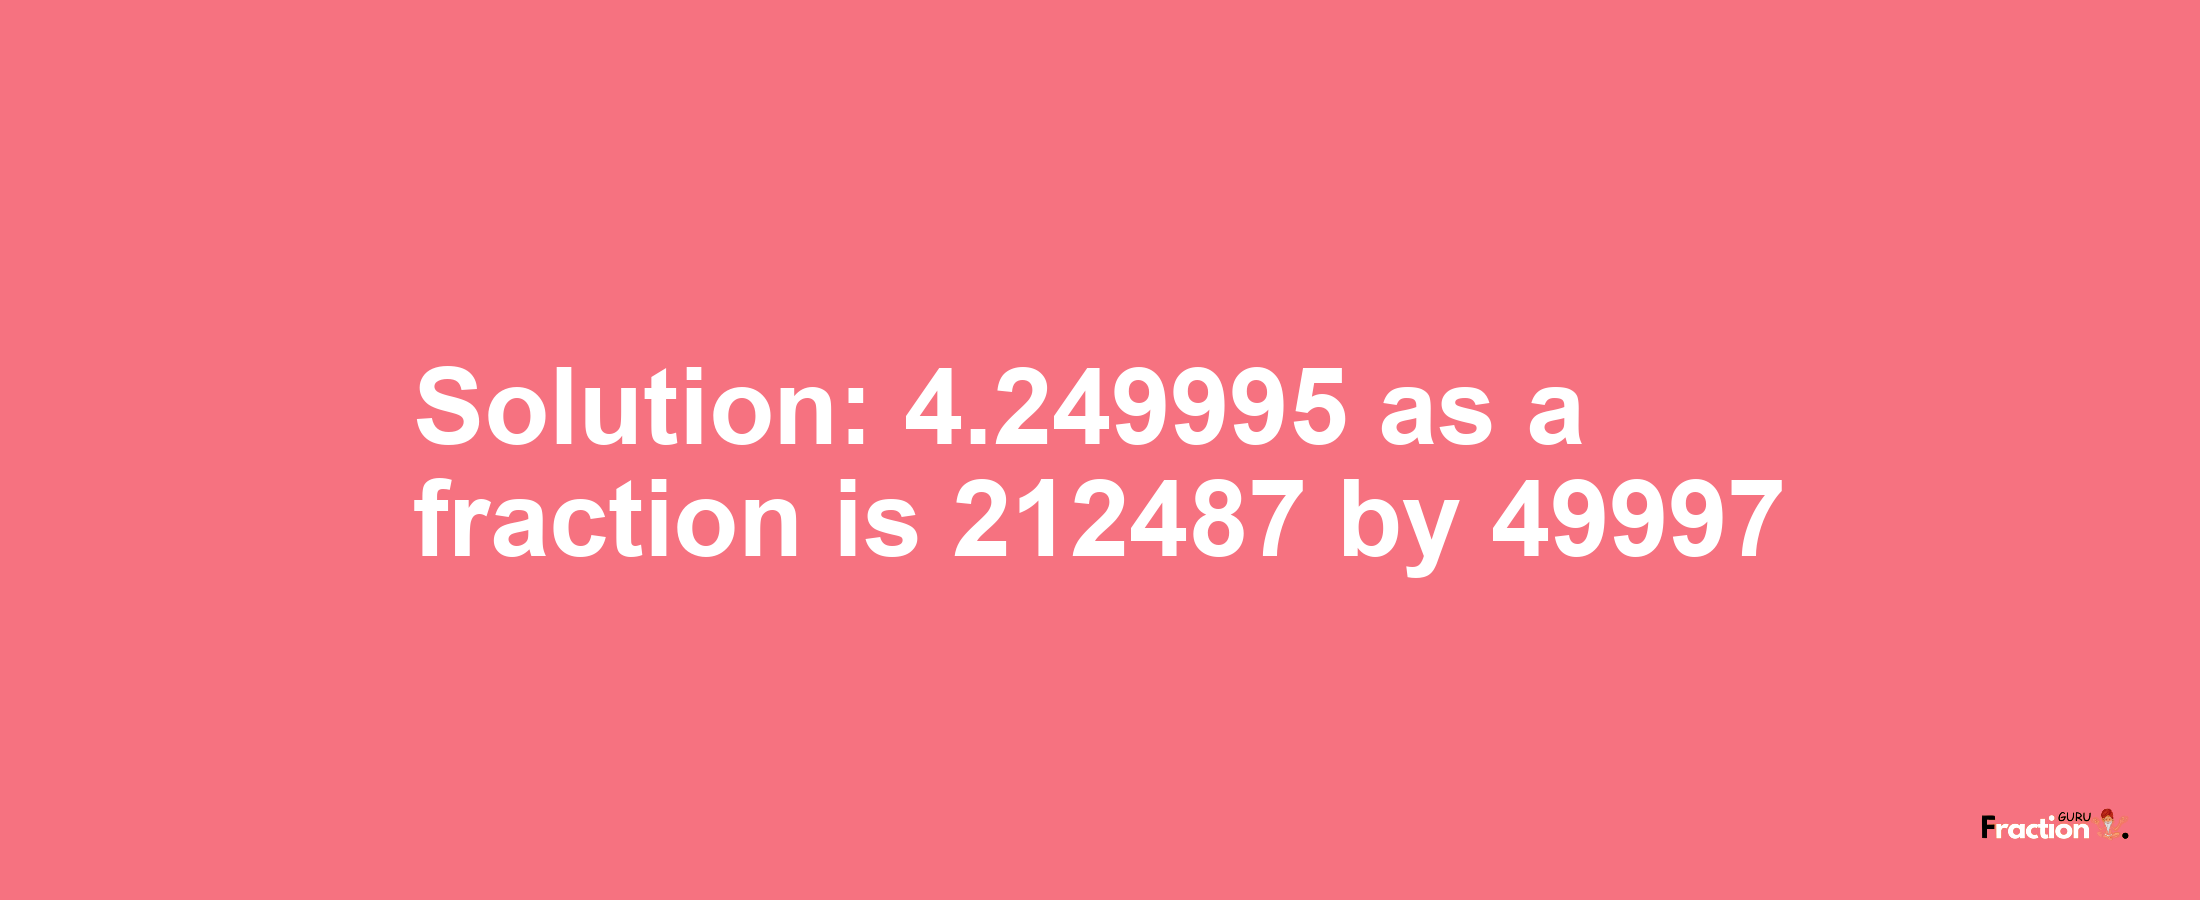 Solution:4.249995 as a fraction is 212487/49997